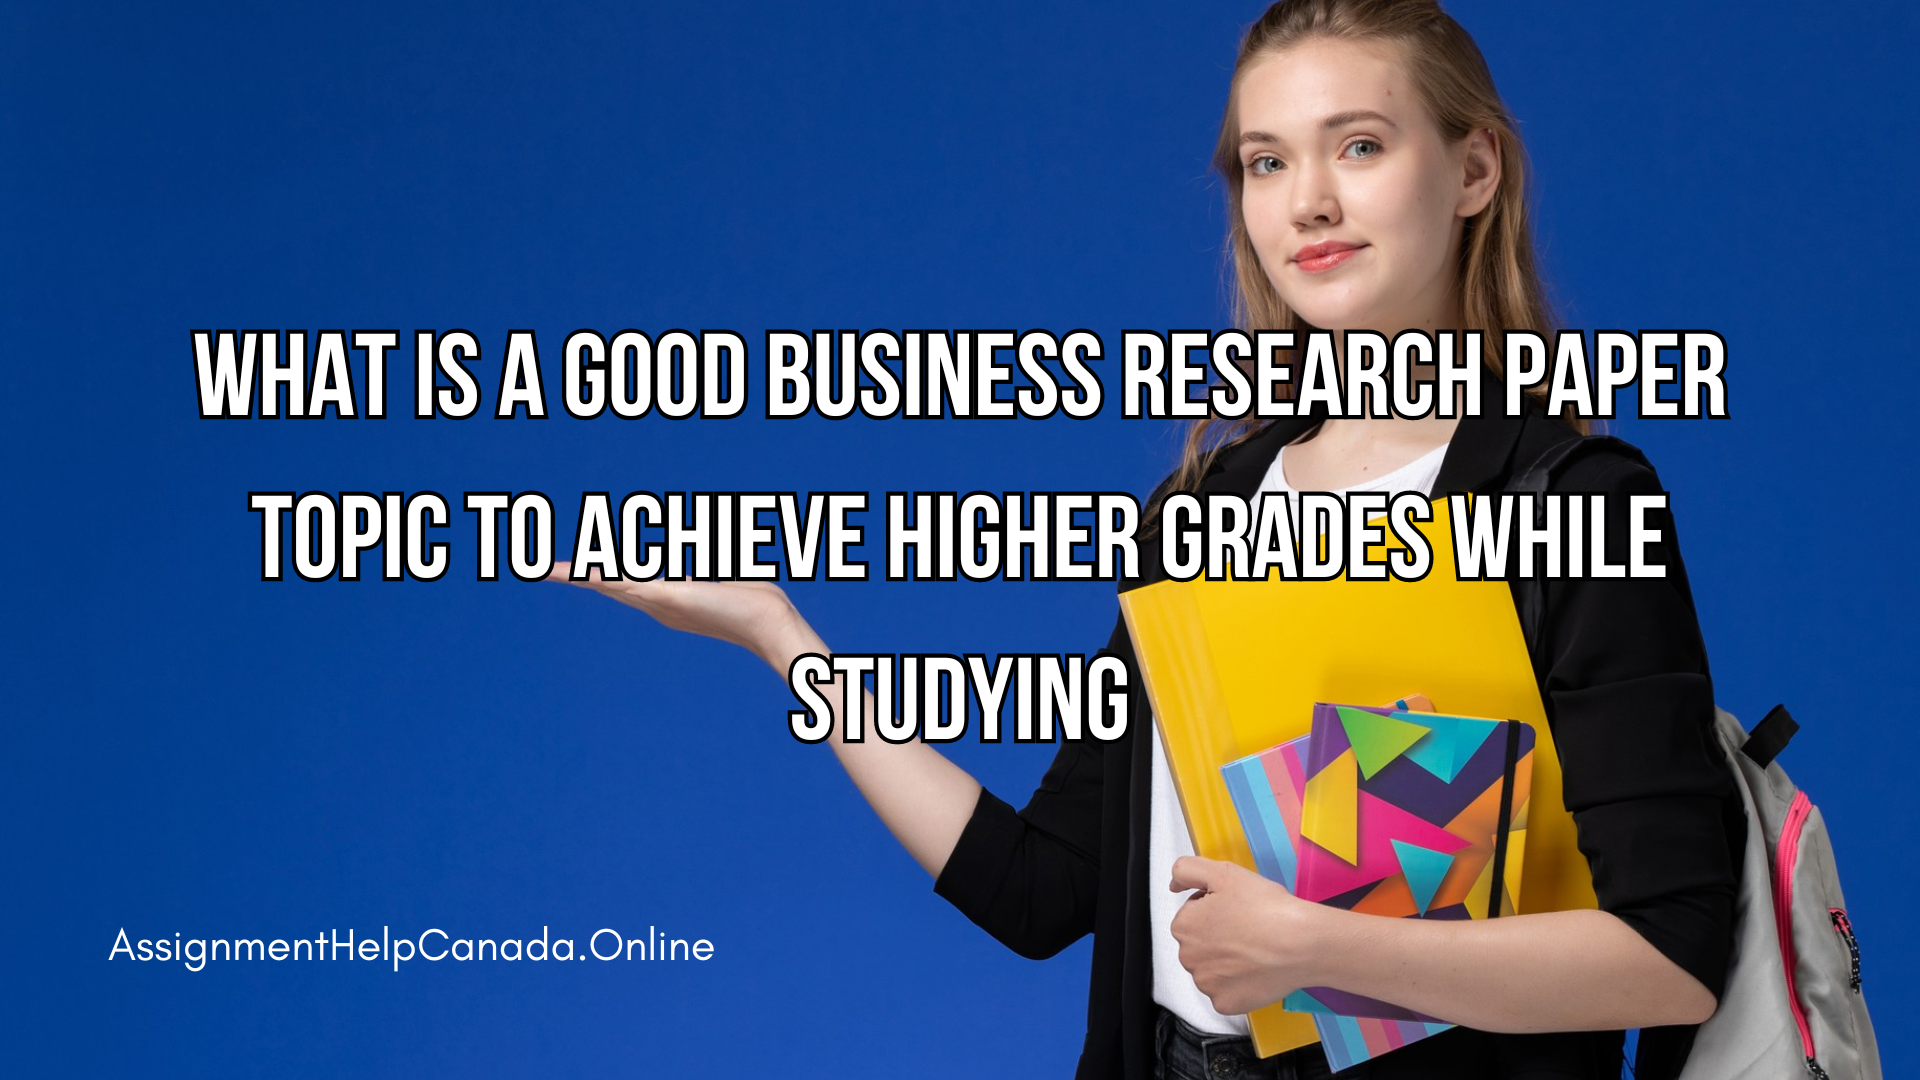 What is a Good Business Research Paper Topic to Achieve Higher Grades While Studying